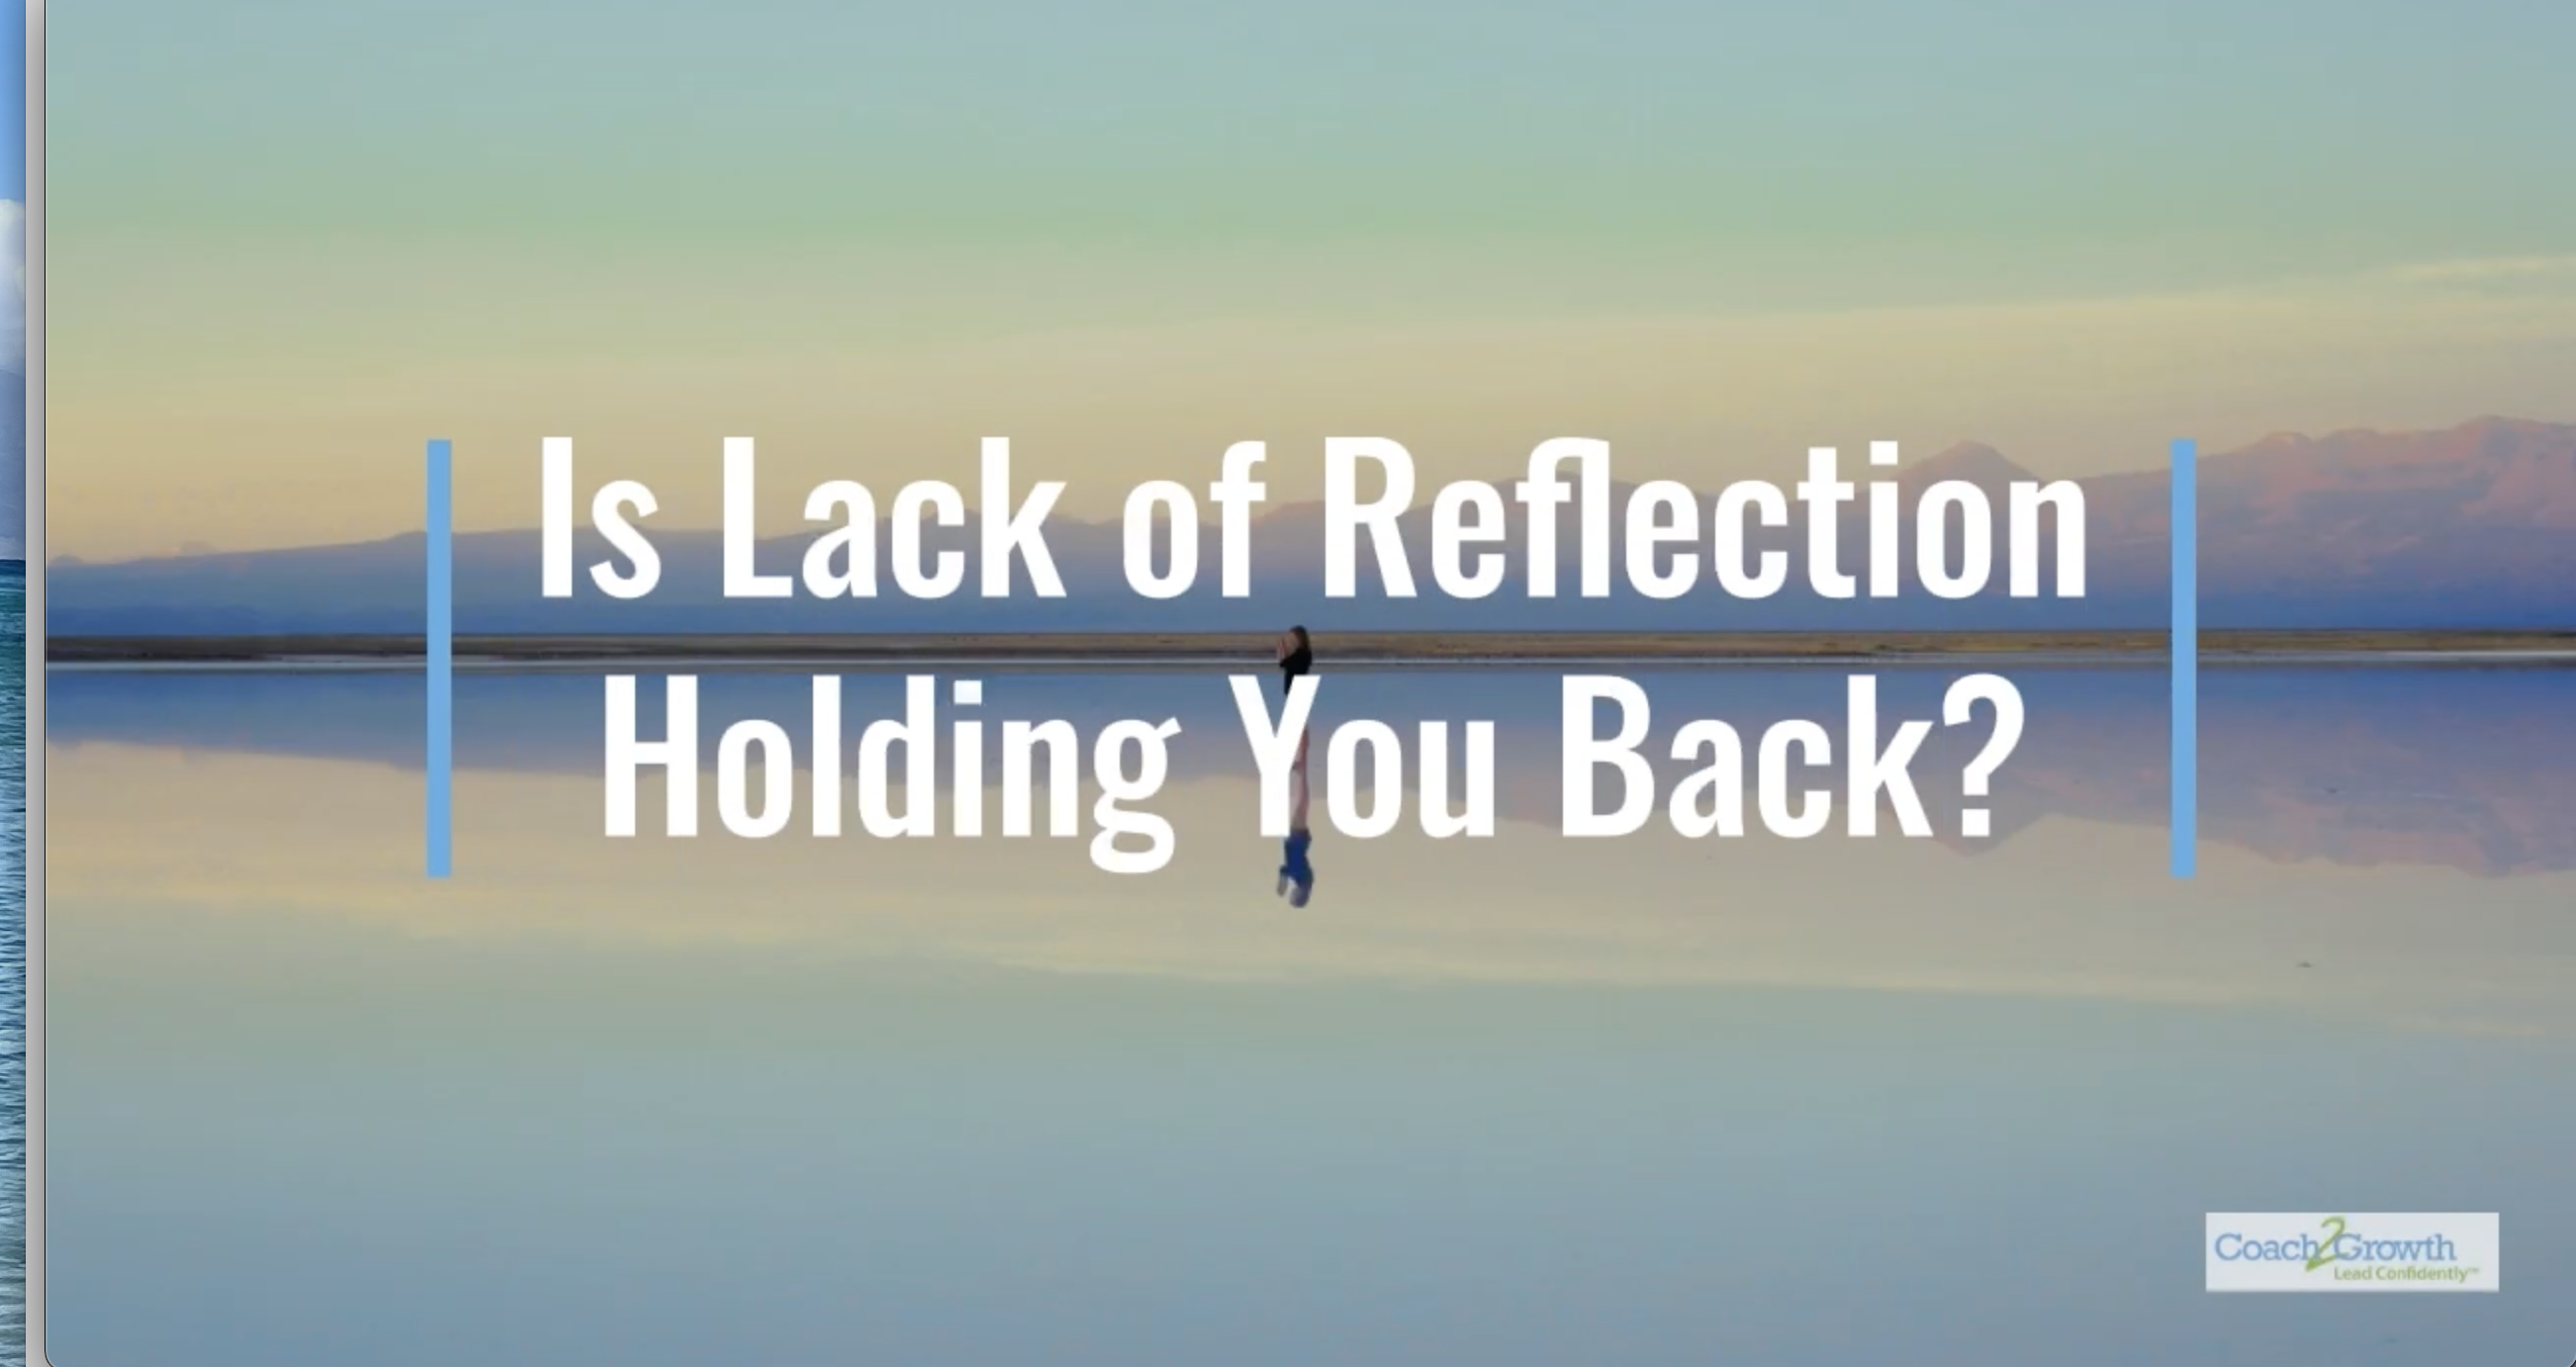 Is Lack of Reflection Holding You Back?